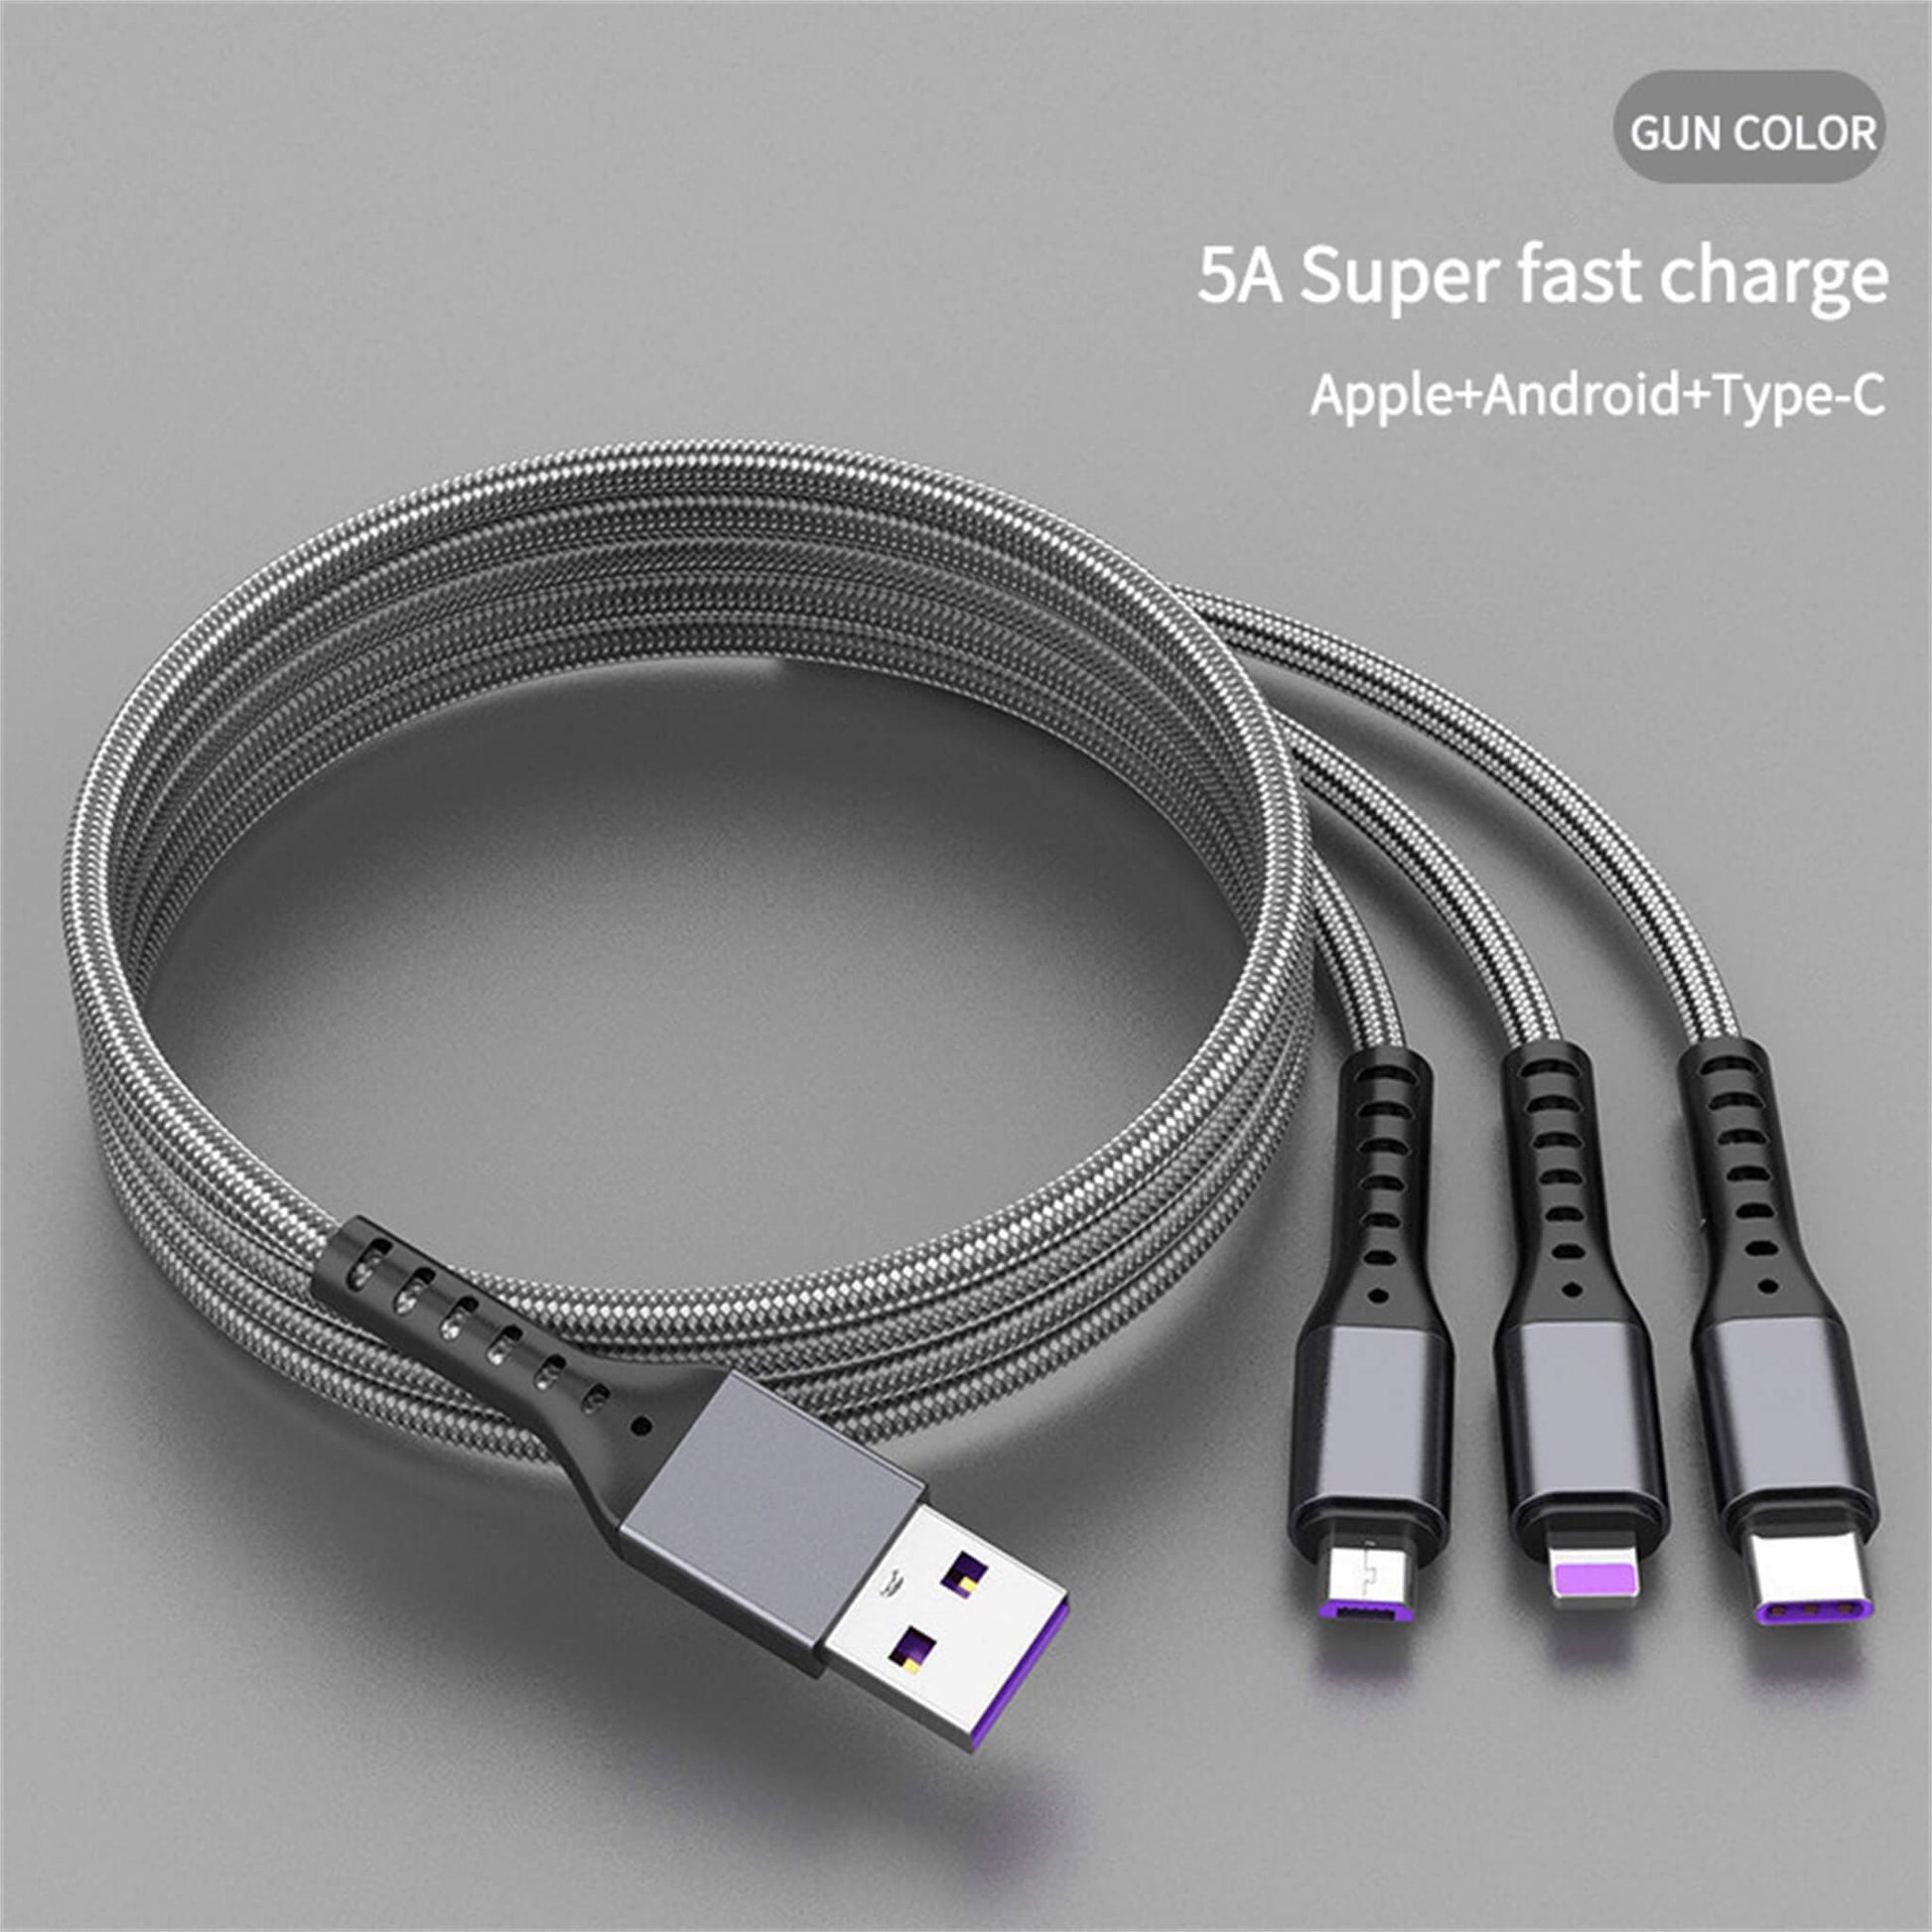 Nylon Braided 3 in 1 Multi Charging Cable